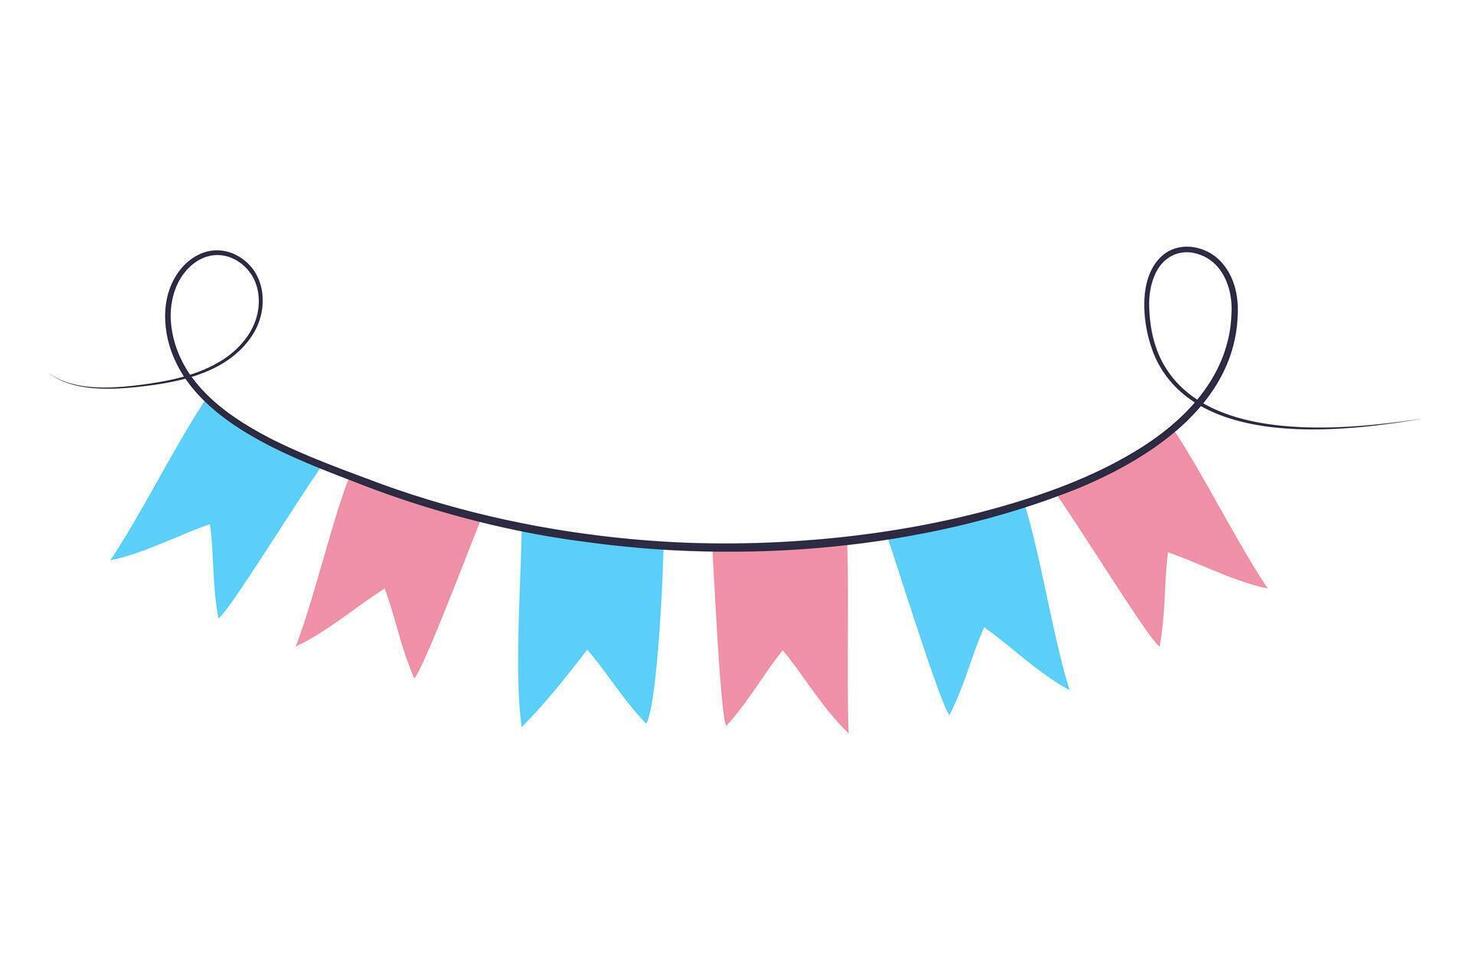 Festive flags garland in transgender flag colors. Colorful pink and blue party decoration. Vector illustration isolated on white background.